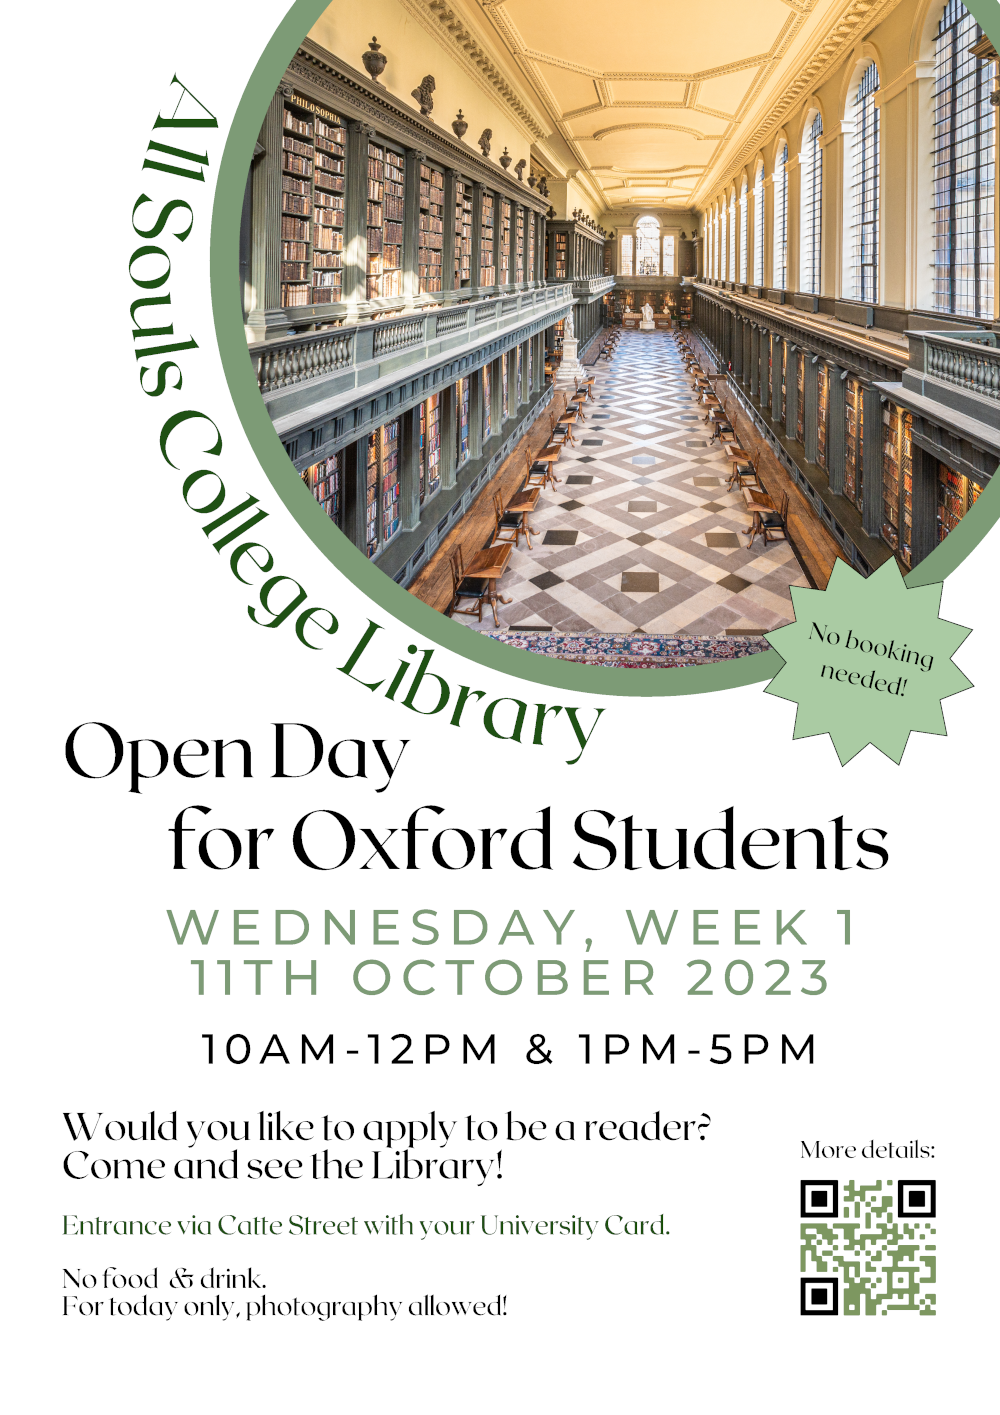 Poster with image of the library and text as above.